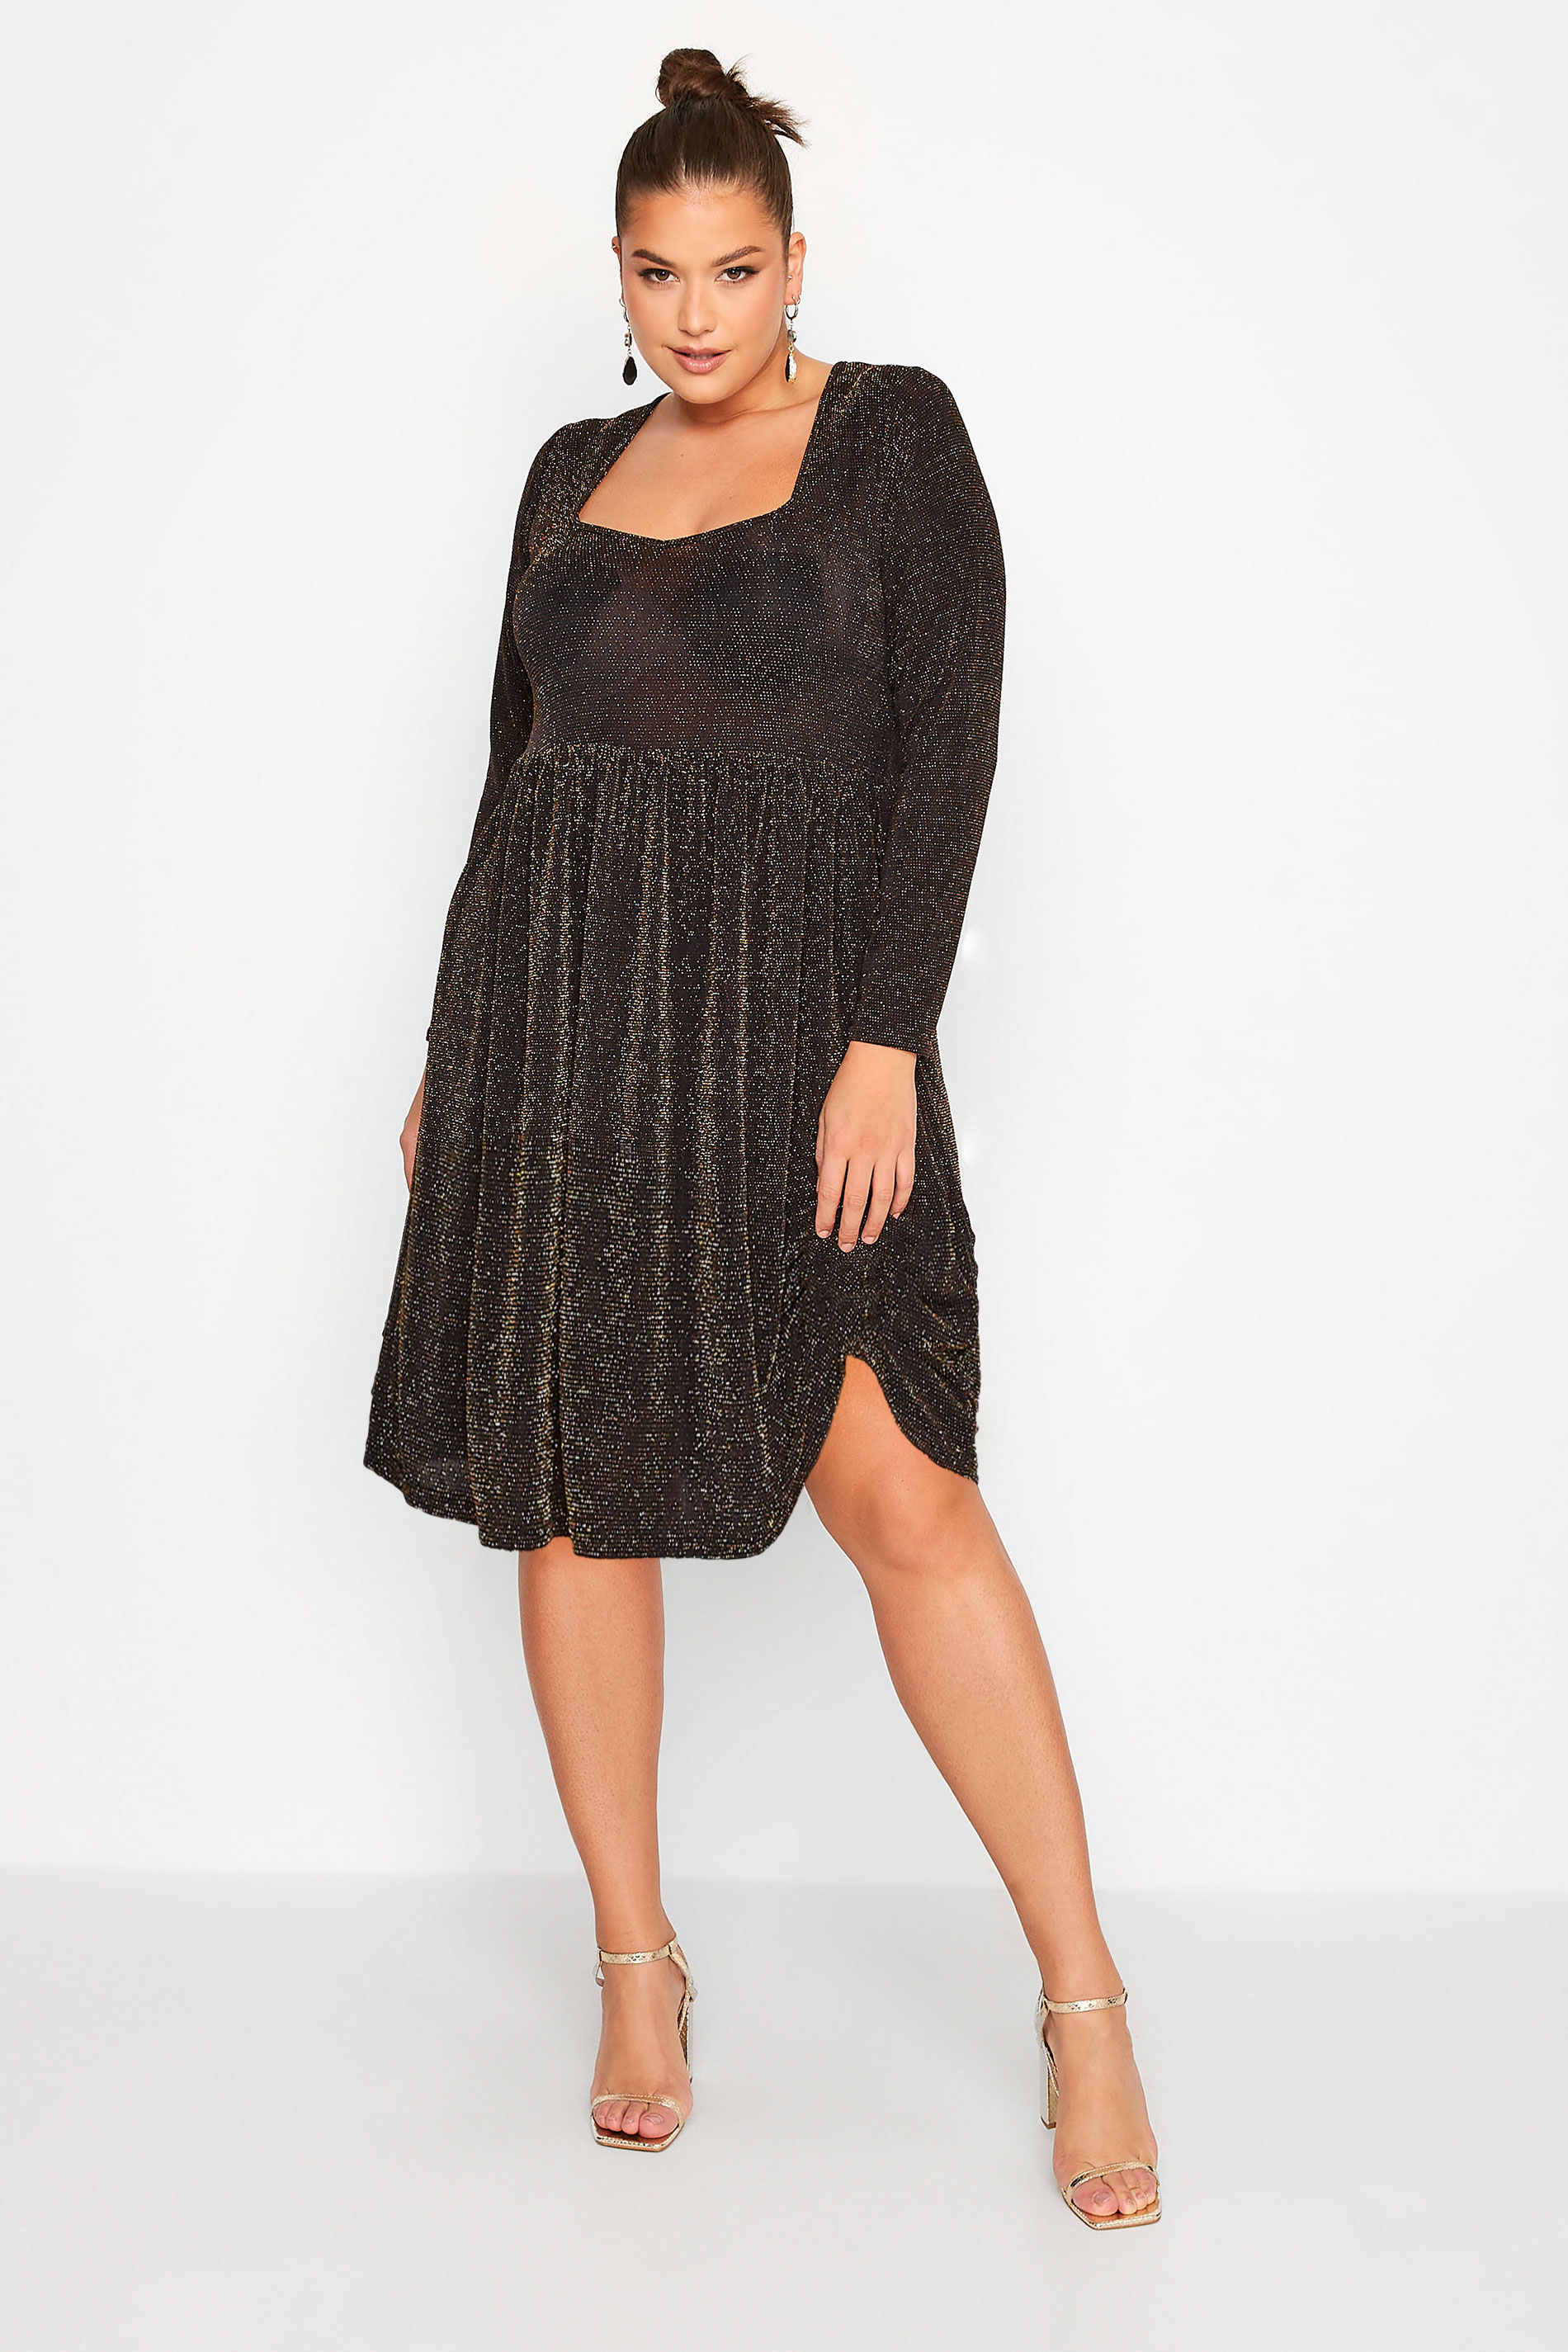 LIMITED COLLECTION Plus Size Black & Gold Glitter Sweetheart Neck Dress | Yours Clothing 1